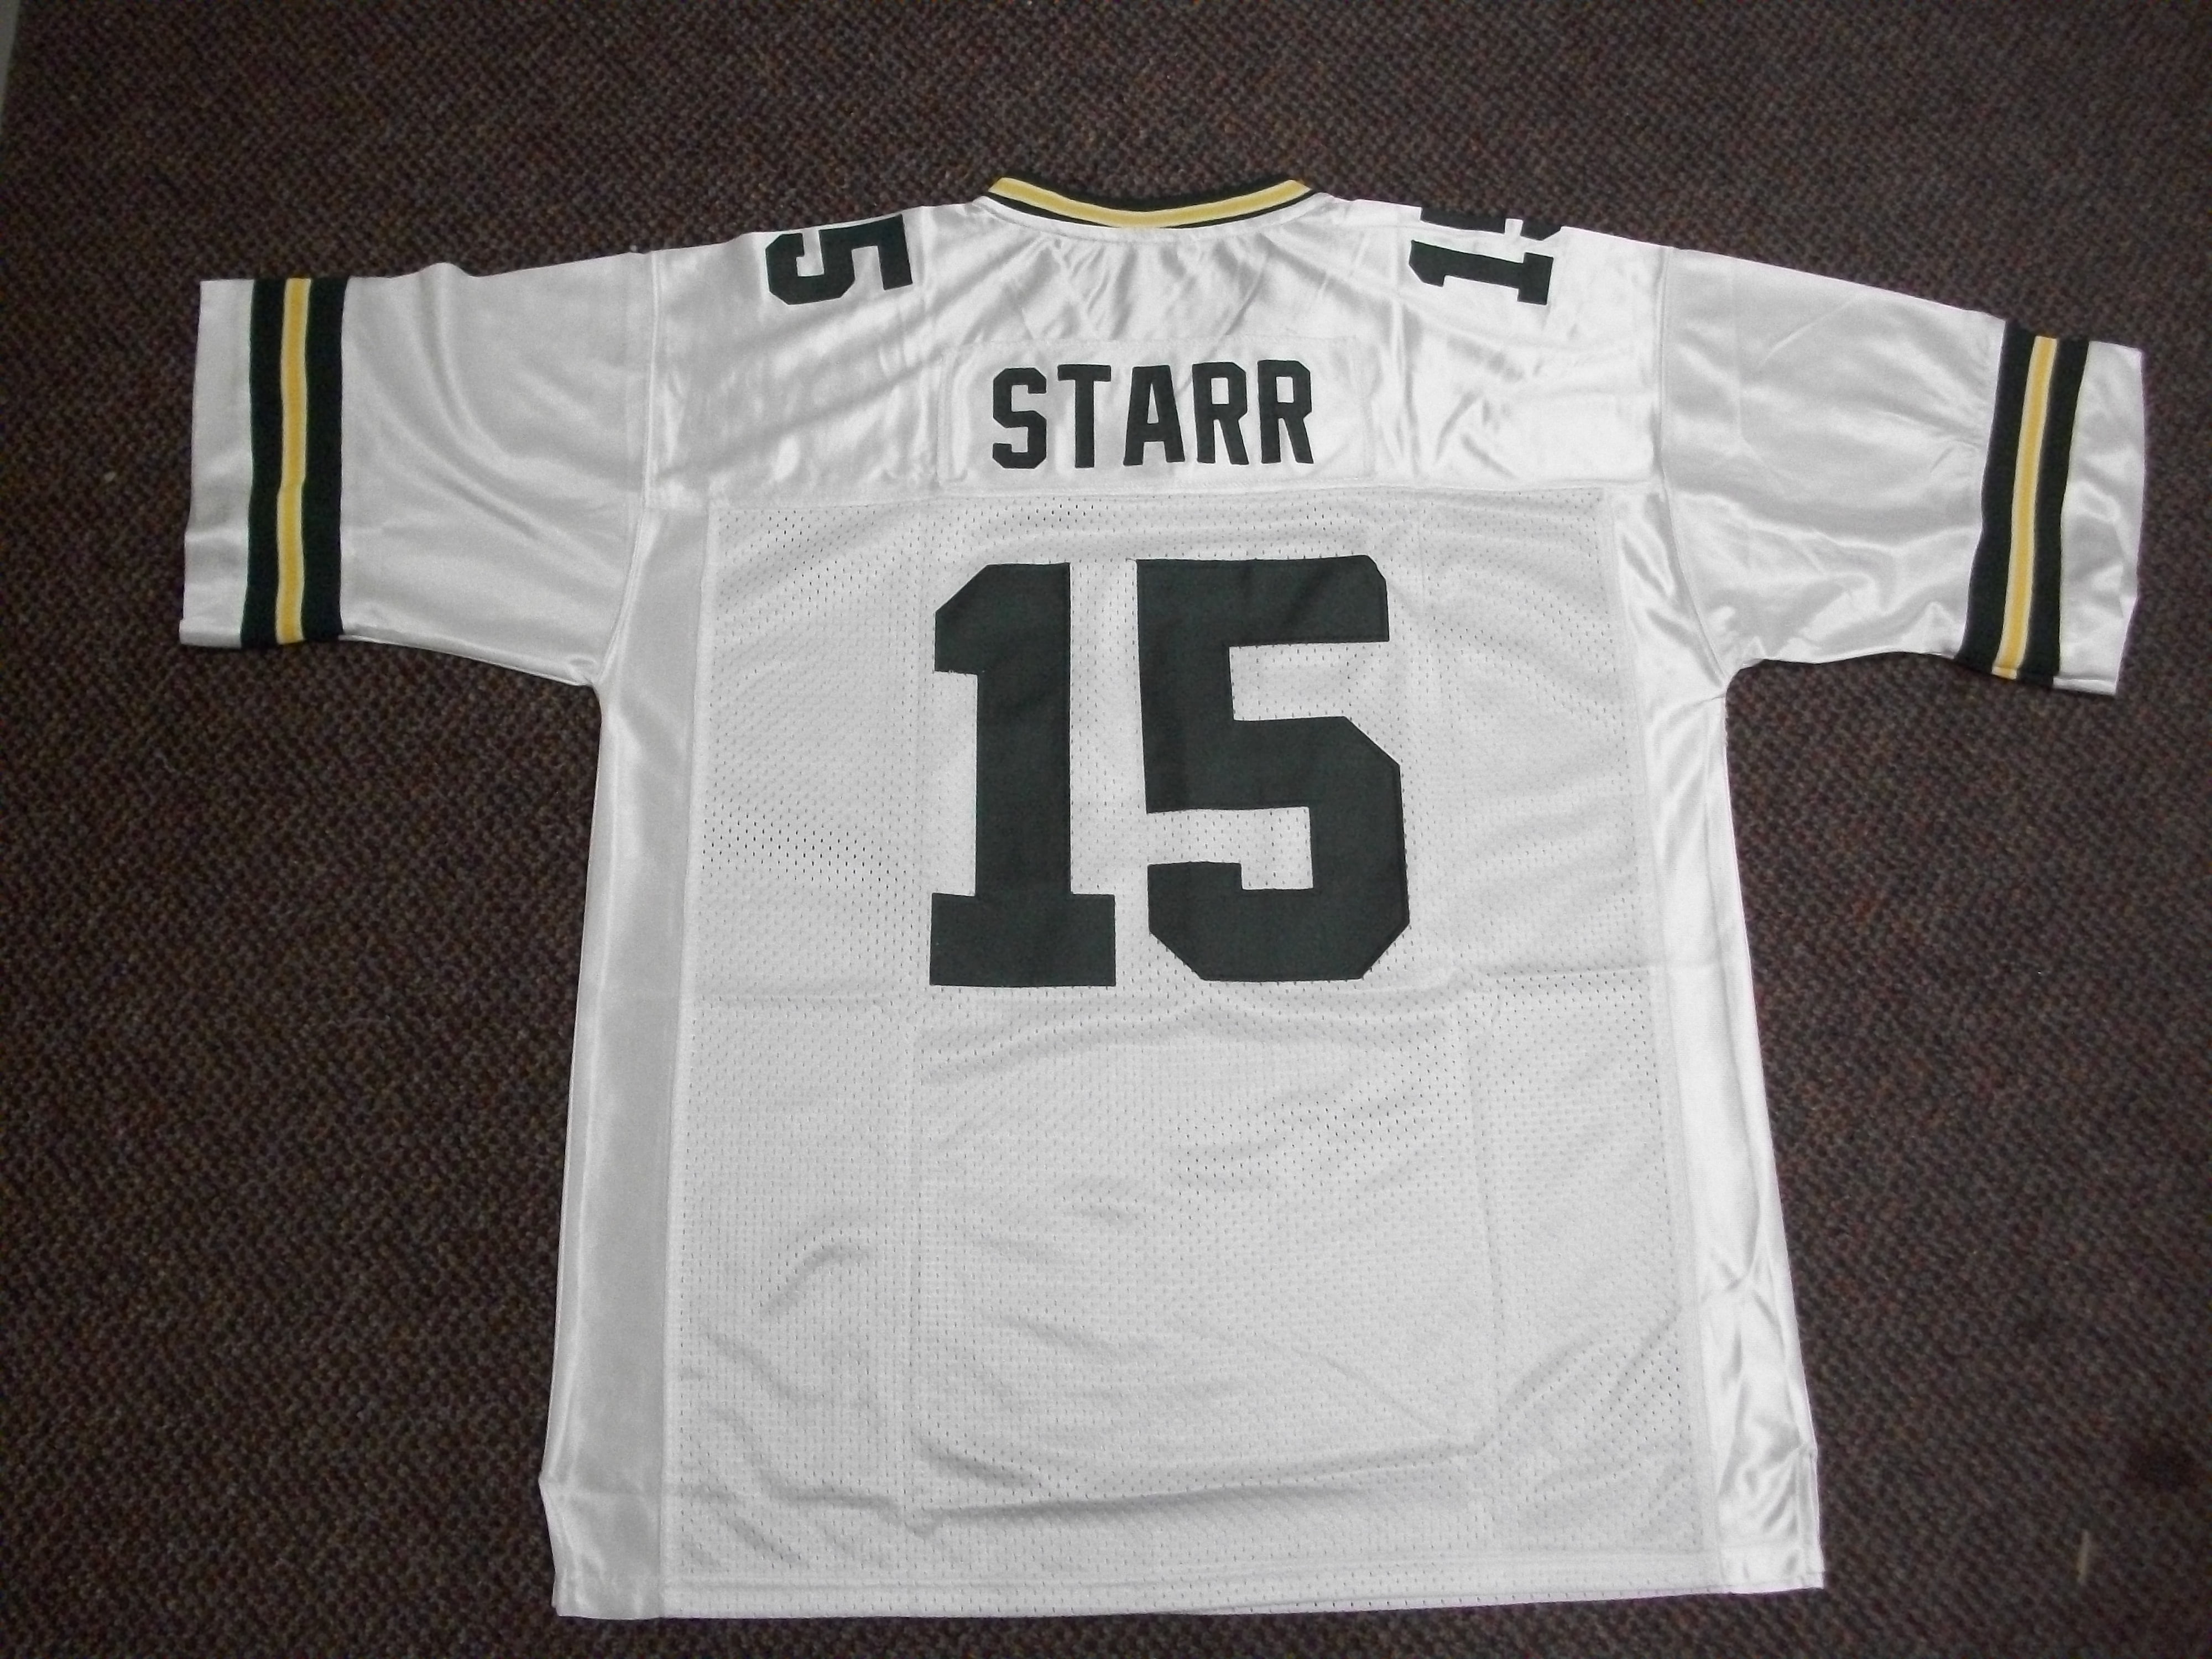 Bart Starr Jersey #15 White Green Bay Unsigned Custom Stitched White Football New No Brands/Logos Sizes S-3XL - Walmart.com